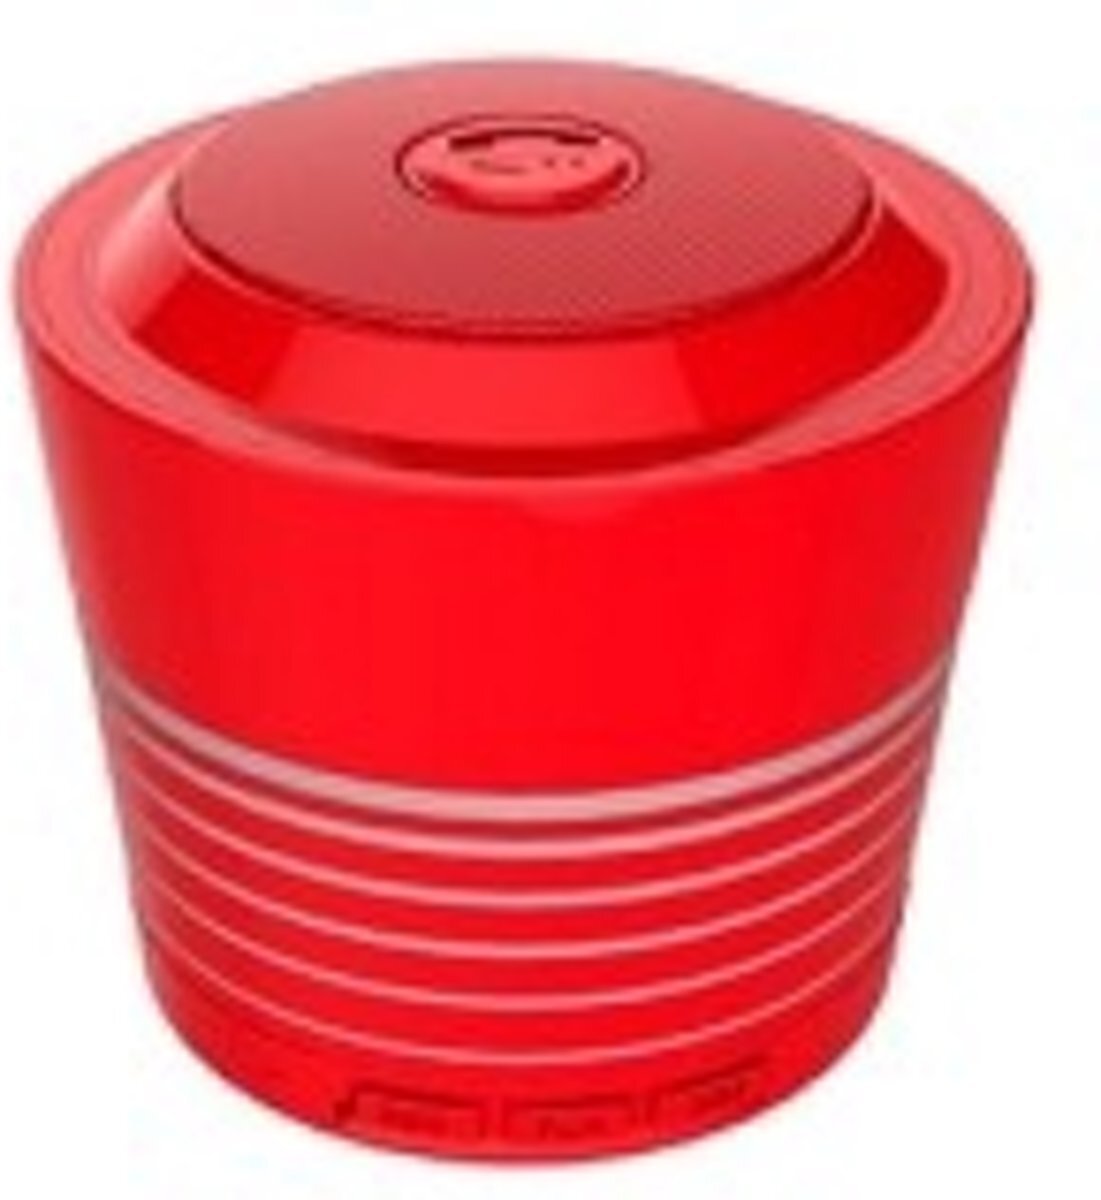 Evertech Bluetooth Stereo Speaker with FM Radio _ Red rood